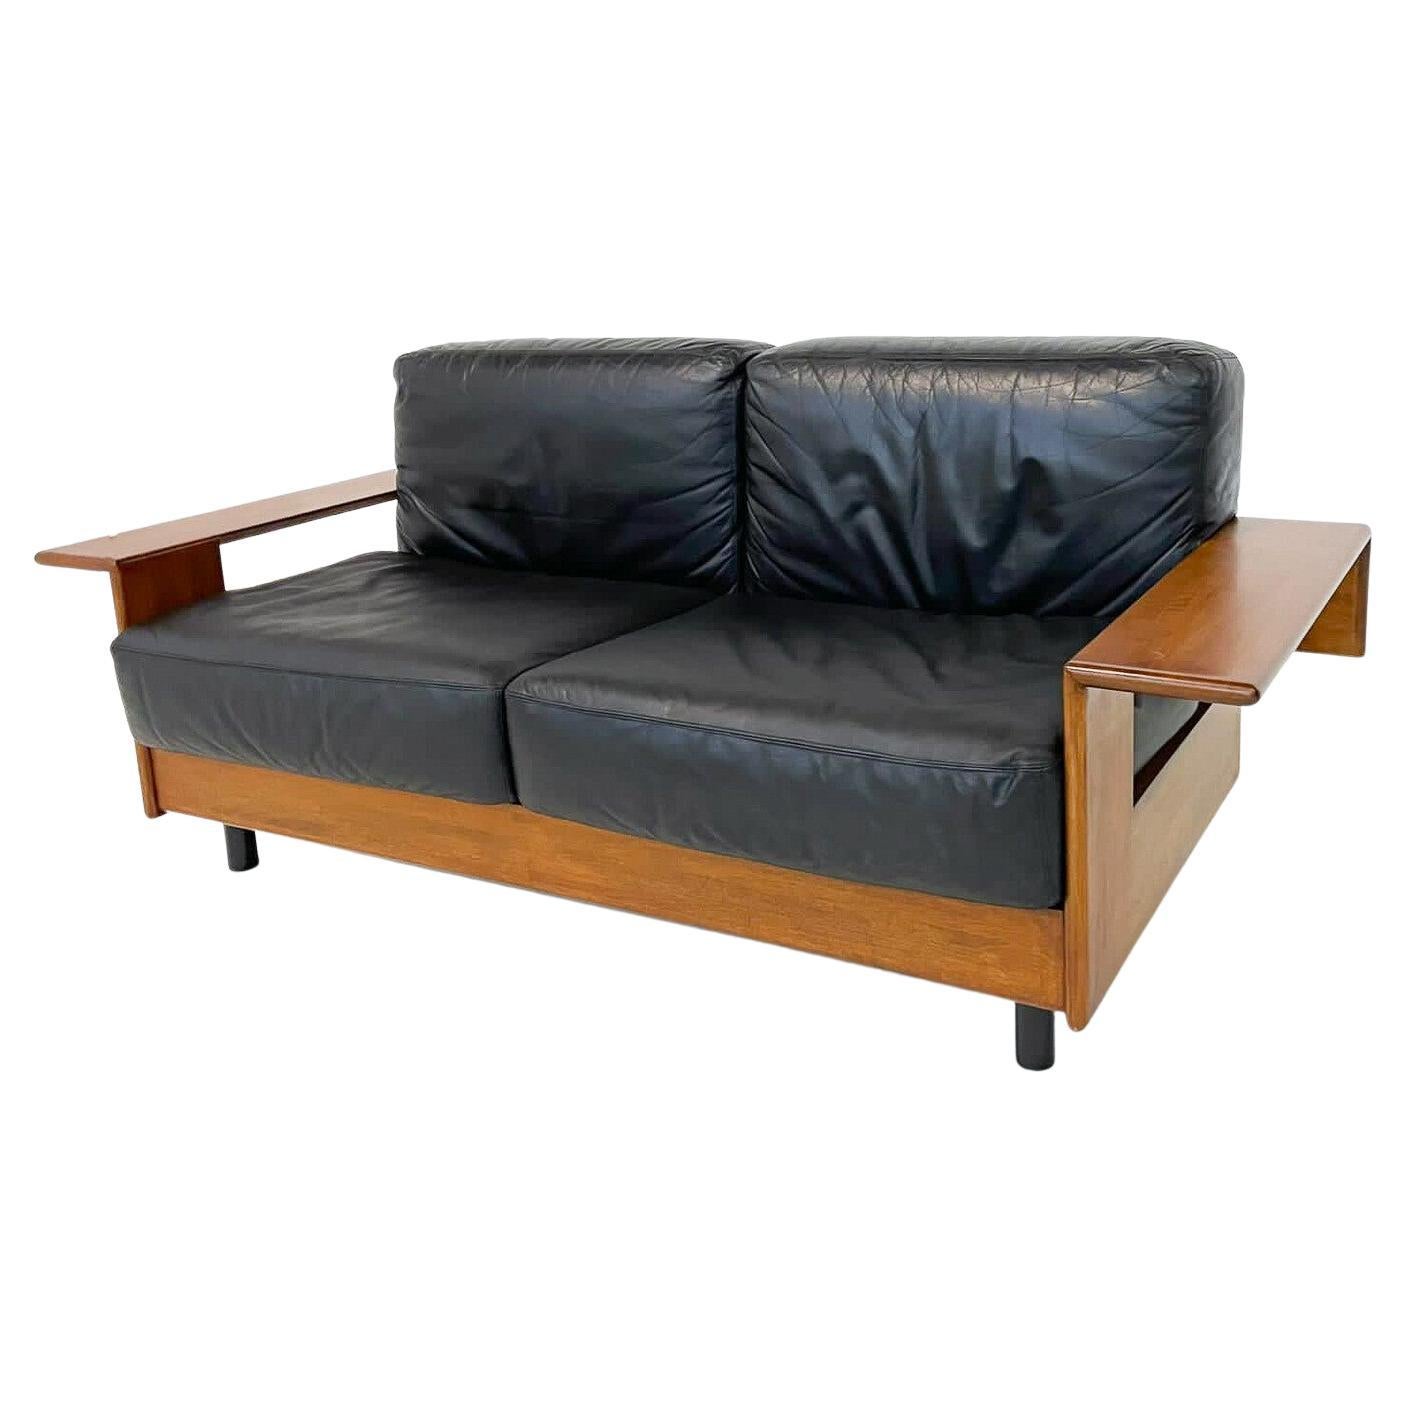 Mid-Century Modern Italian Sofa, Black Leather and Wood, 1960s, Two Available For Sale